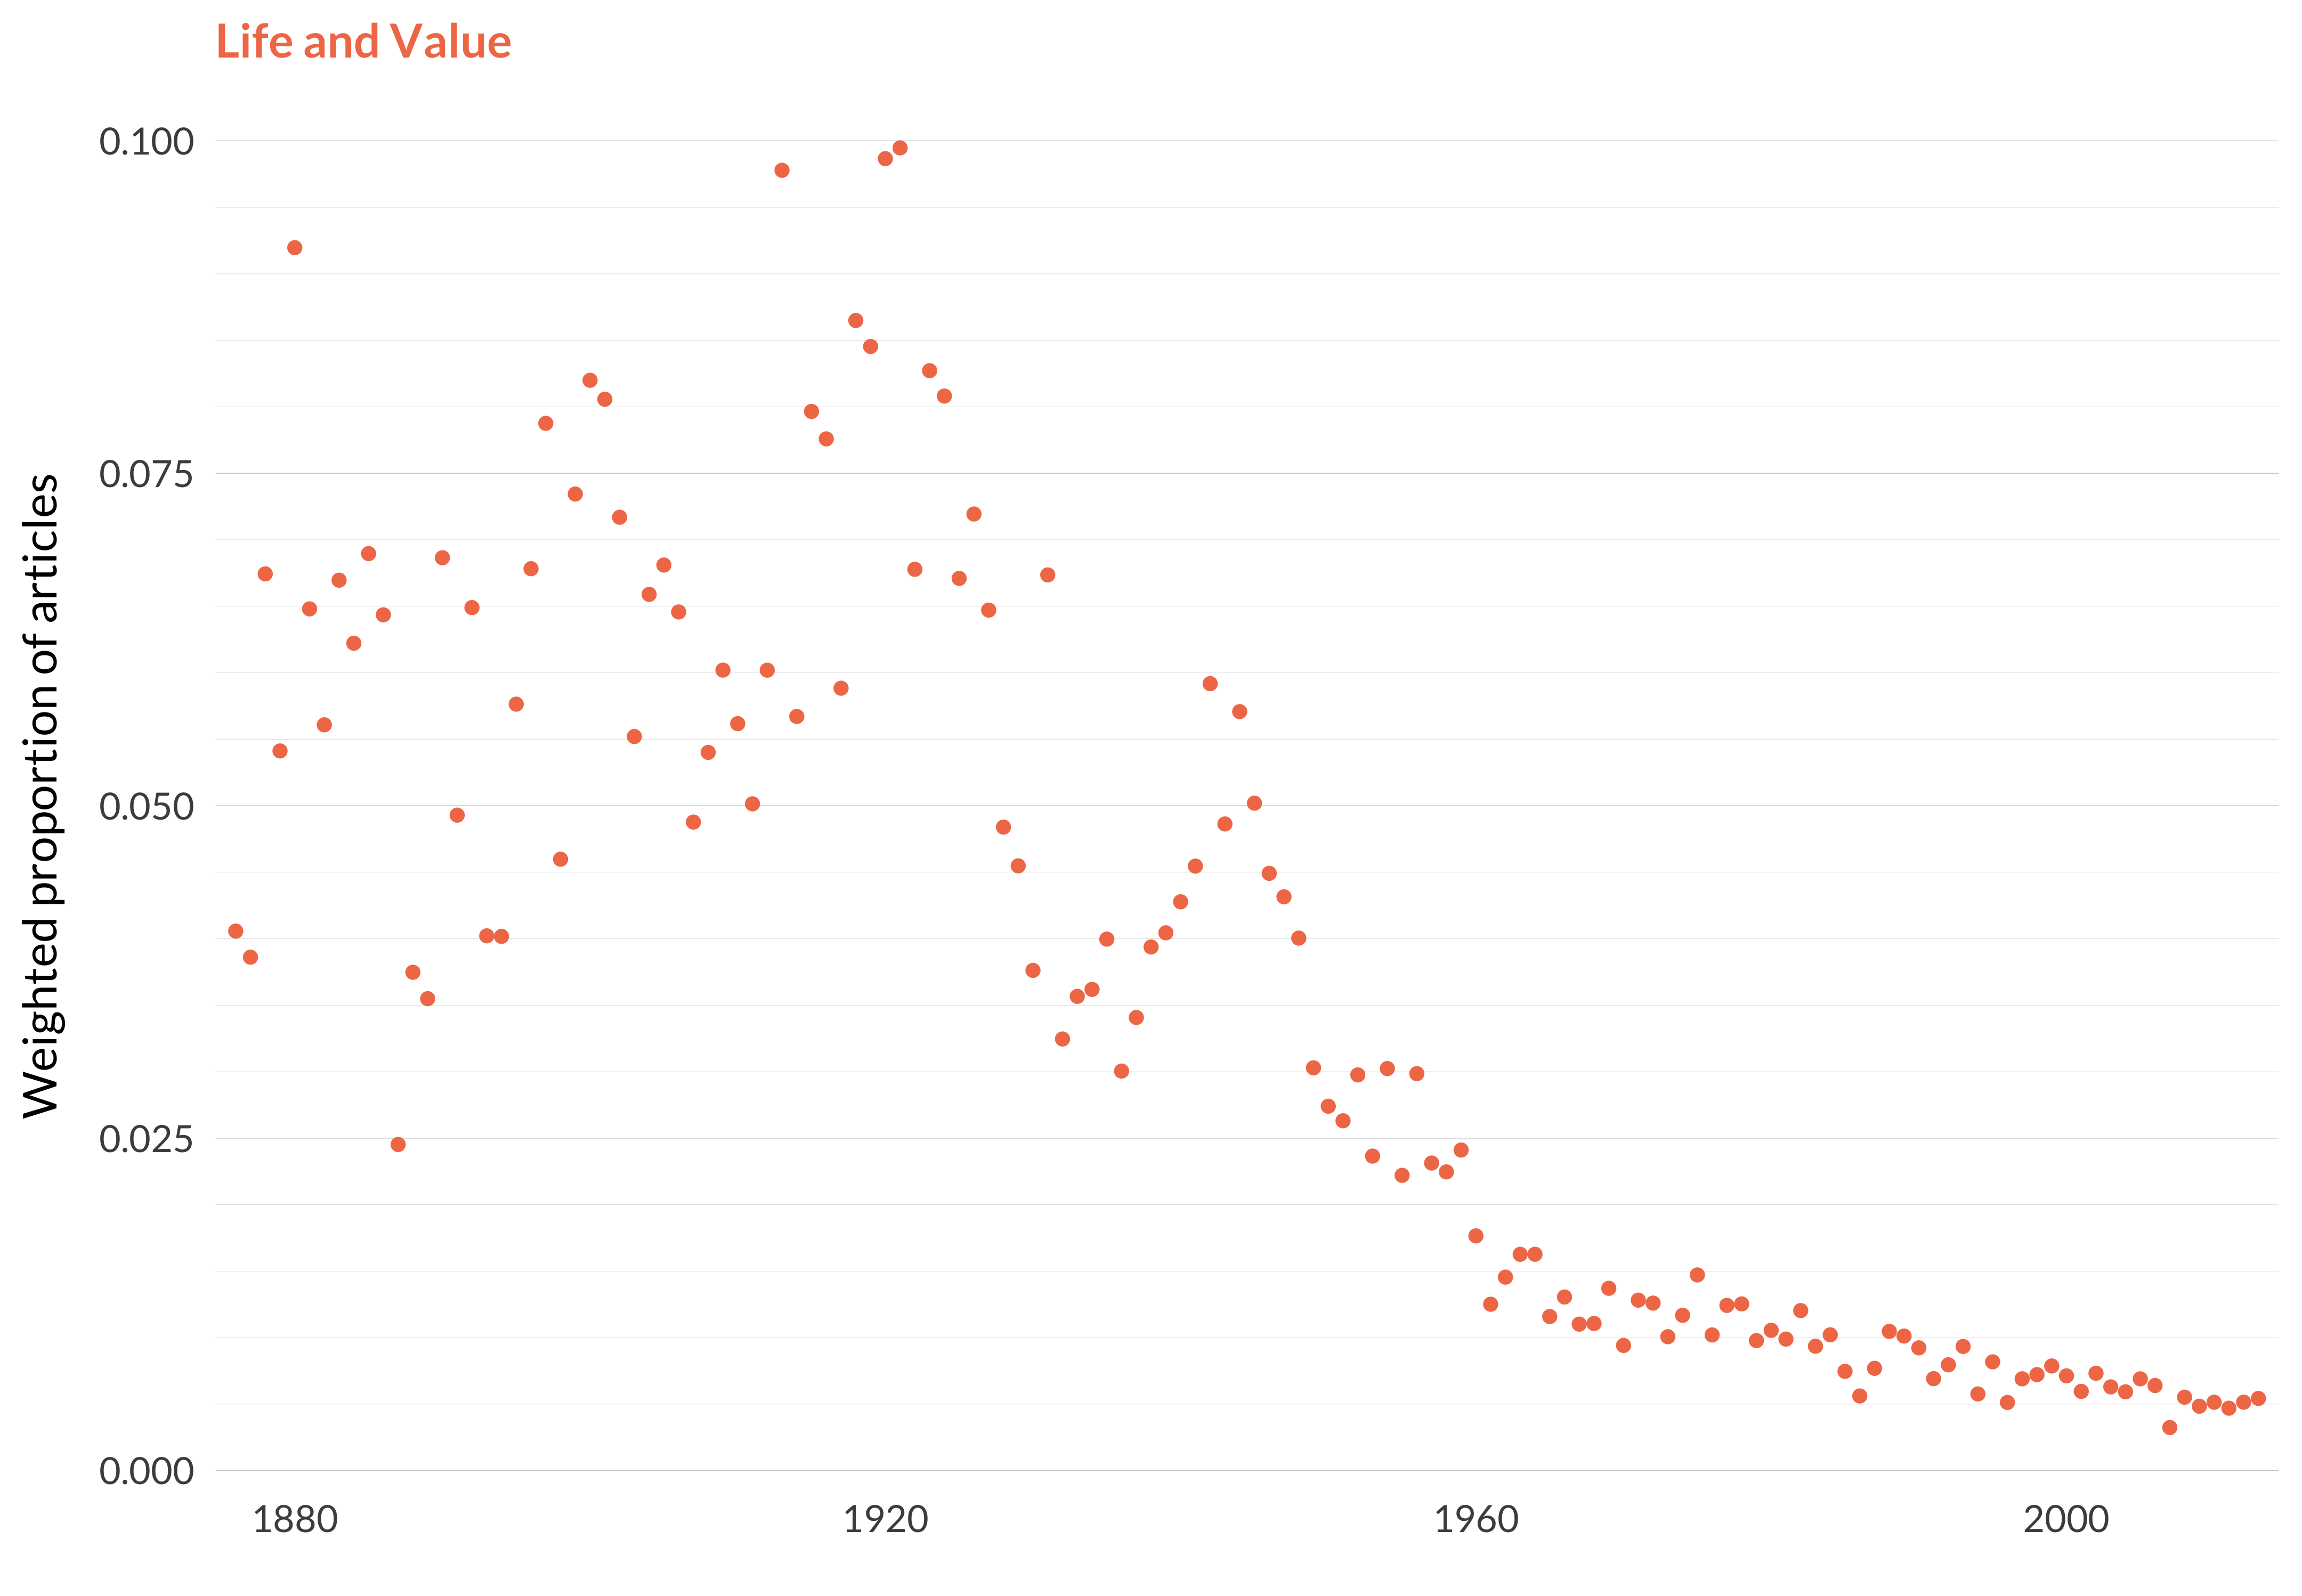 A scatterplot showing which proportion of articles each year are in the life and valuetopic. The x-axis shows the year, the y-axis measures the proportion of articles each year in this topic. There is one dot per year. The highest value is in 1921 when 9.9% of articles were in this topic. The lowest value is in 2007 when 0.3% of articles were in this topic. The full table that provides the data for this graph is available in Table A.3 in Appendix A.